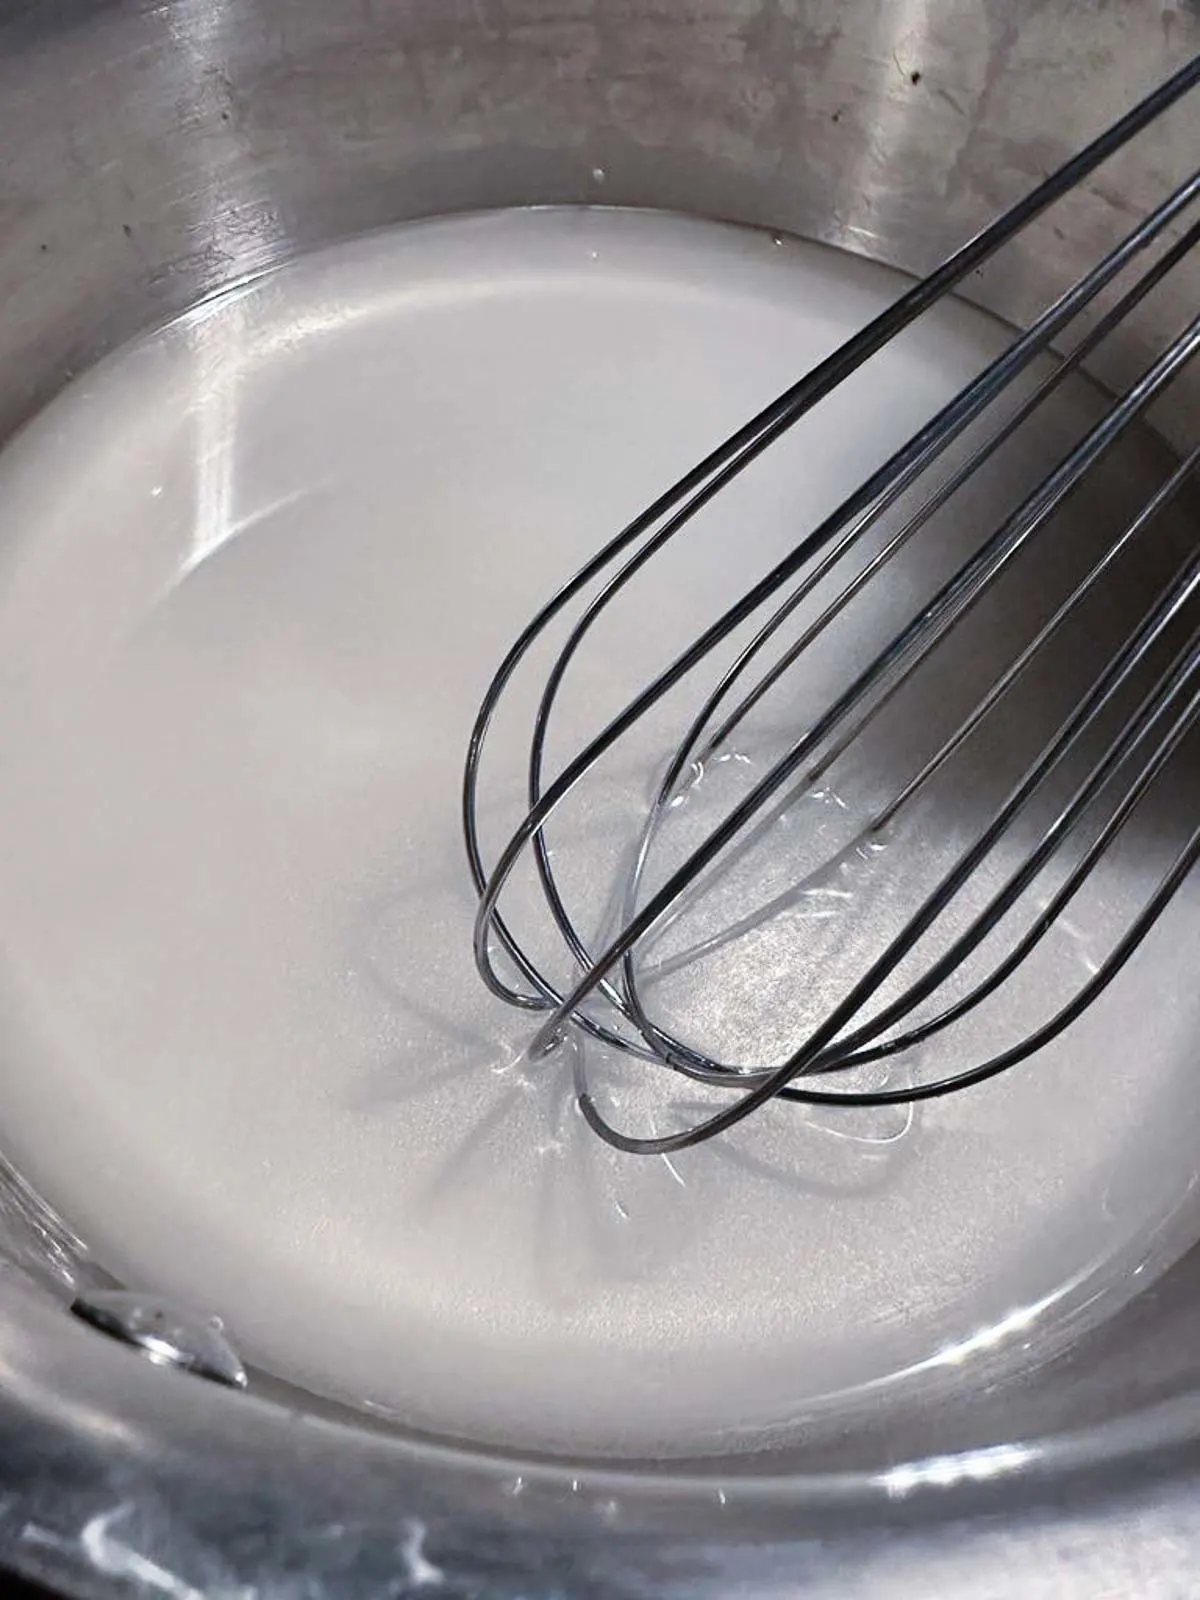 Whisk the sugar and water together in a pot over medium low heat until the sugar dissolves